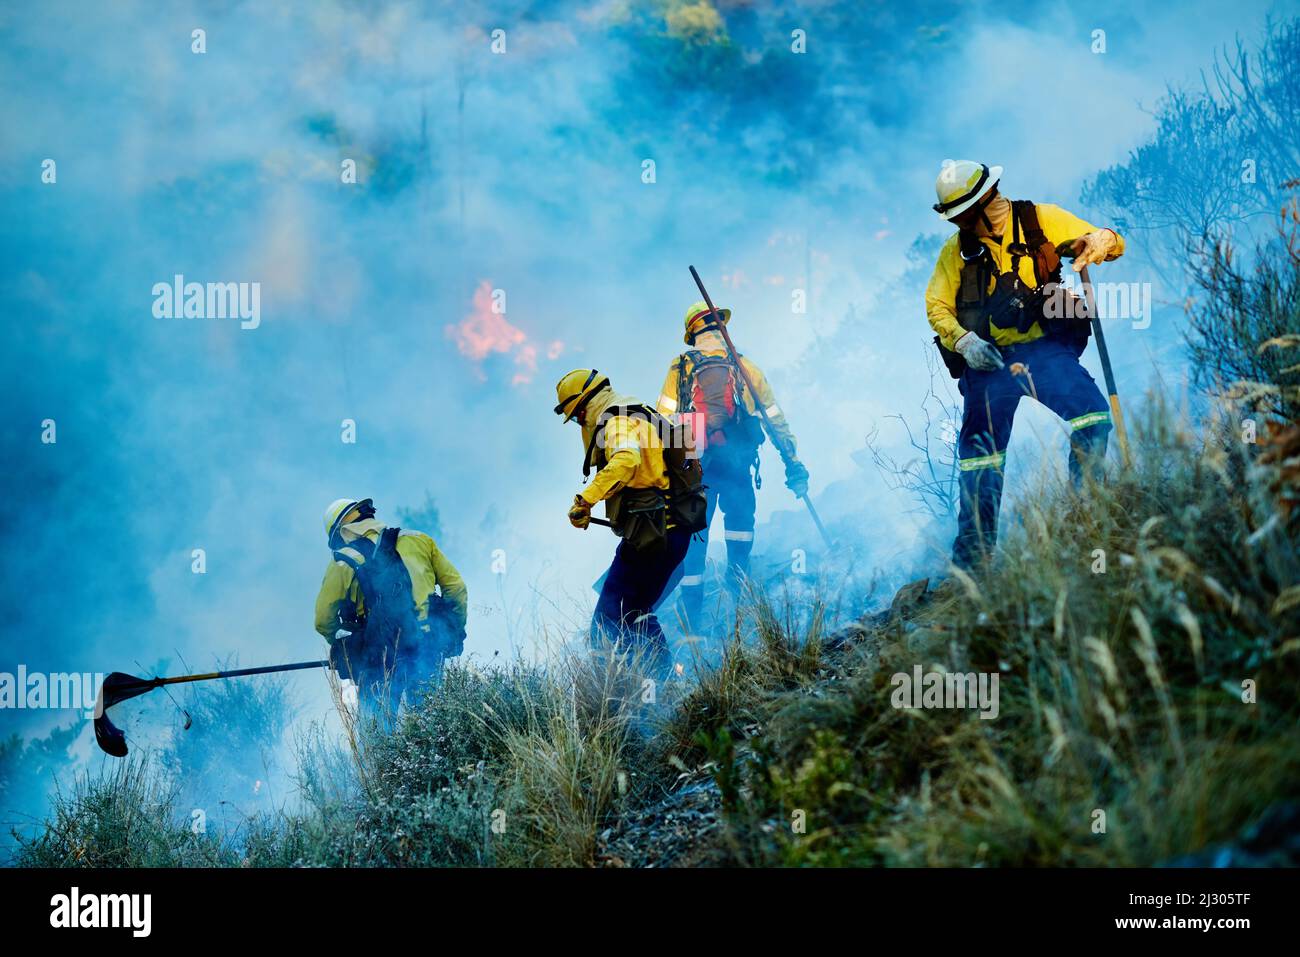 Combating the flames. Shot of fire fighters combating a wild fire. Stock Photo